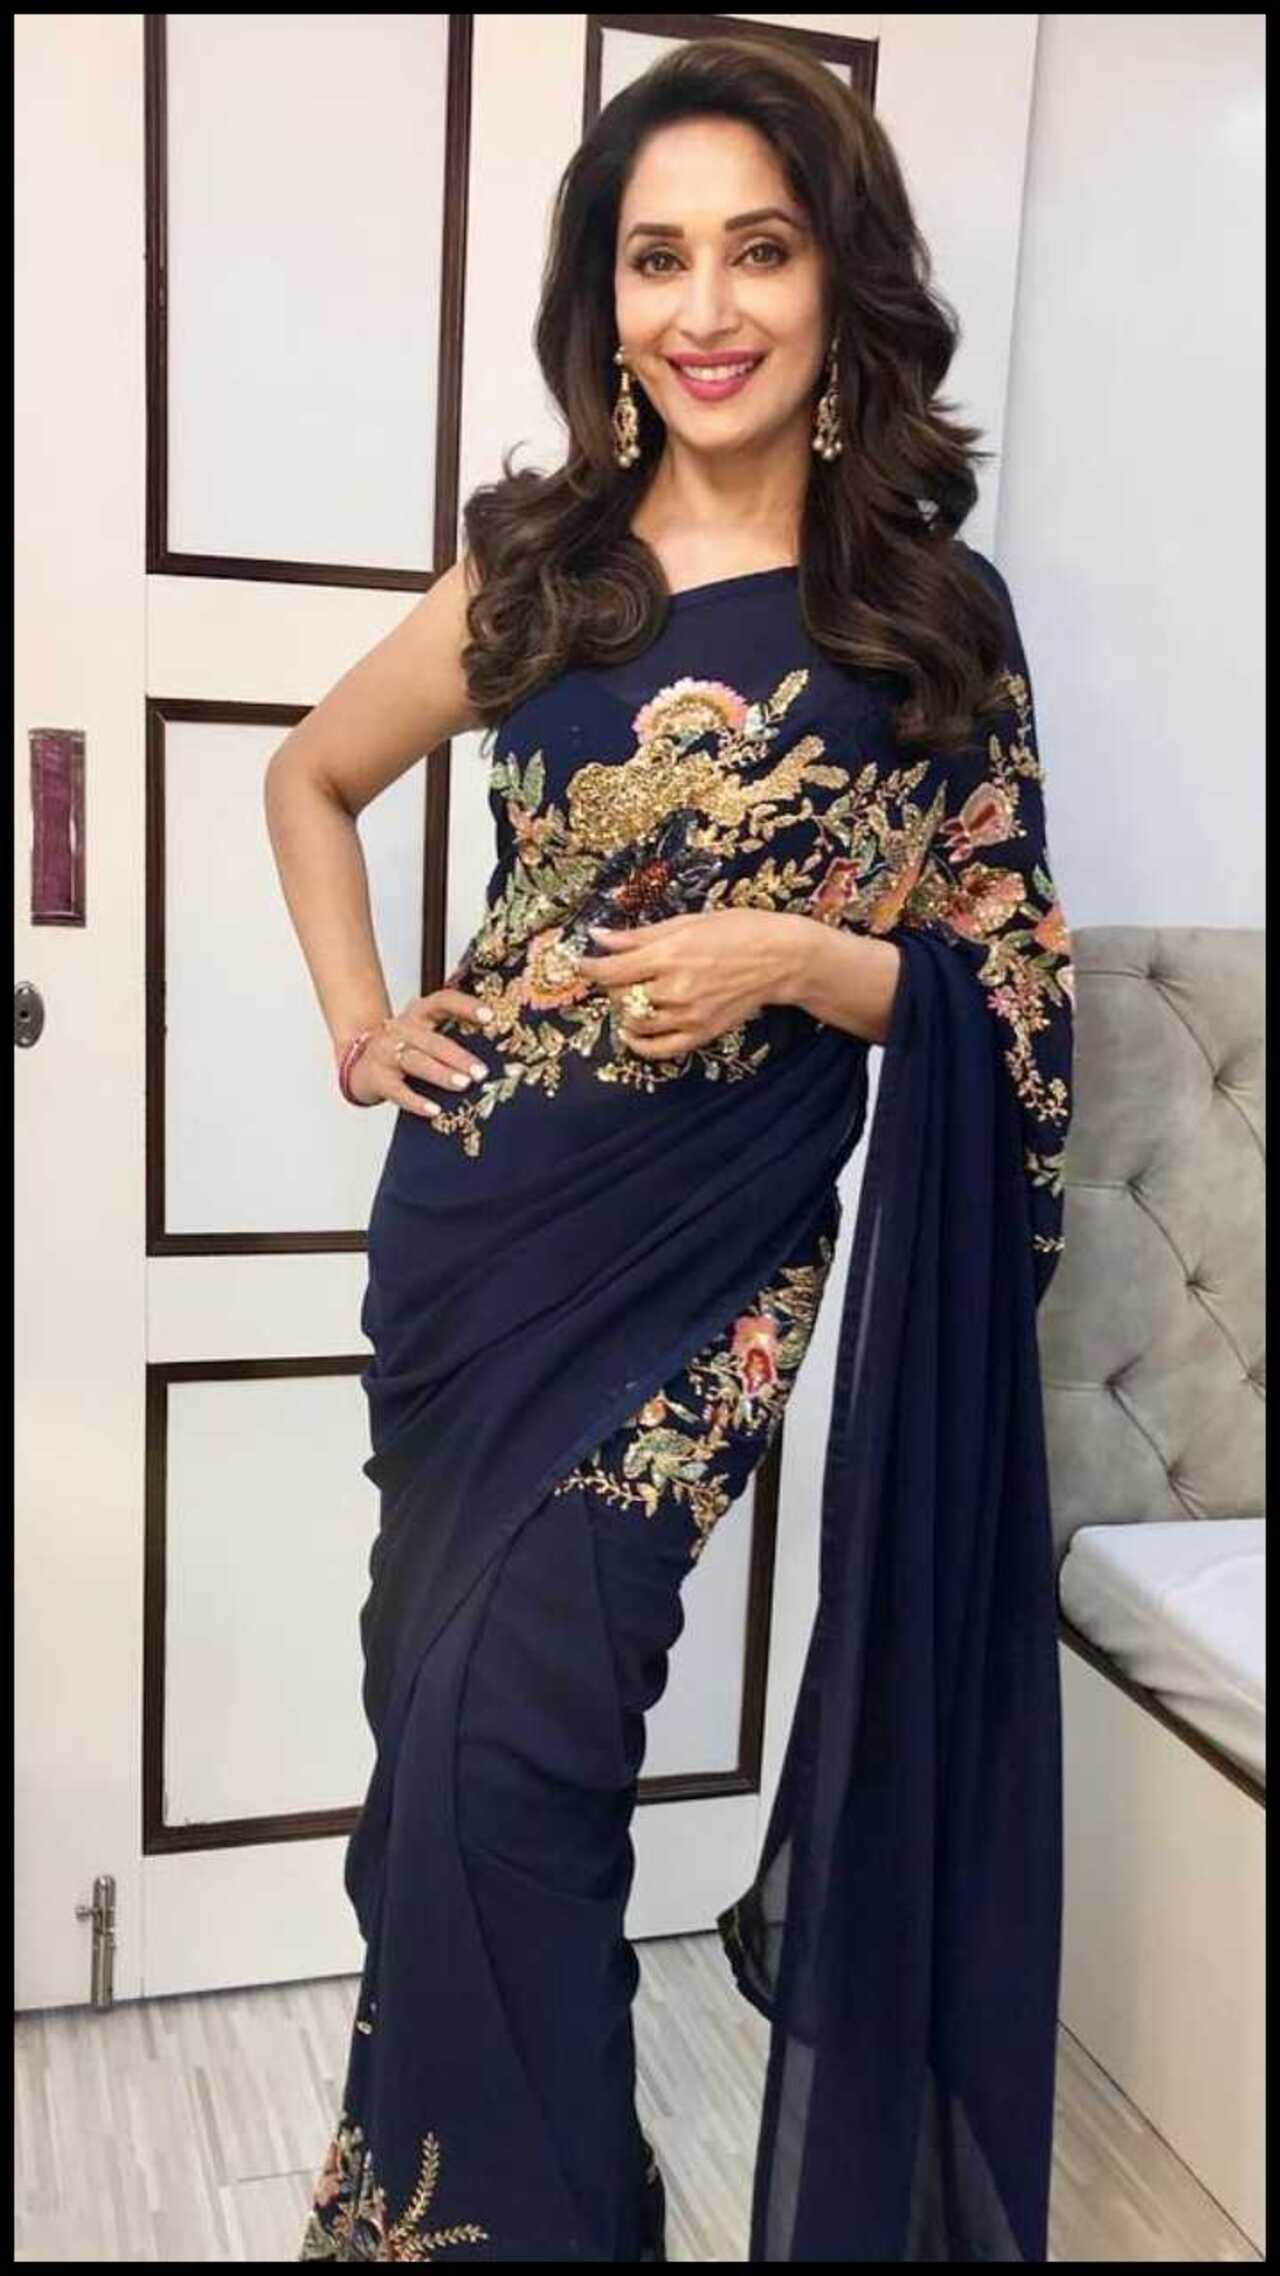 Madhuri Dixit's blue saree with golden embroidery is perfect for the festive season